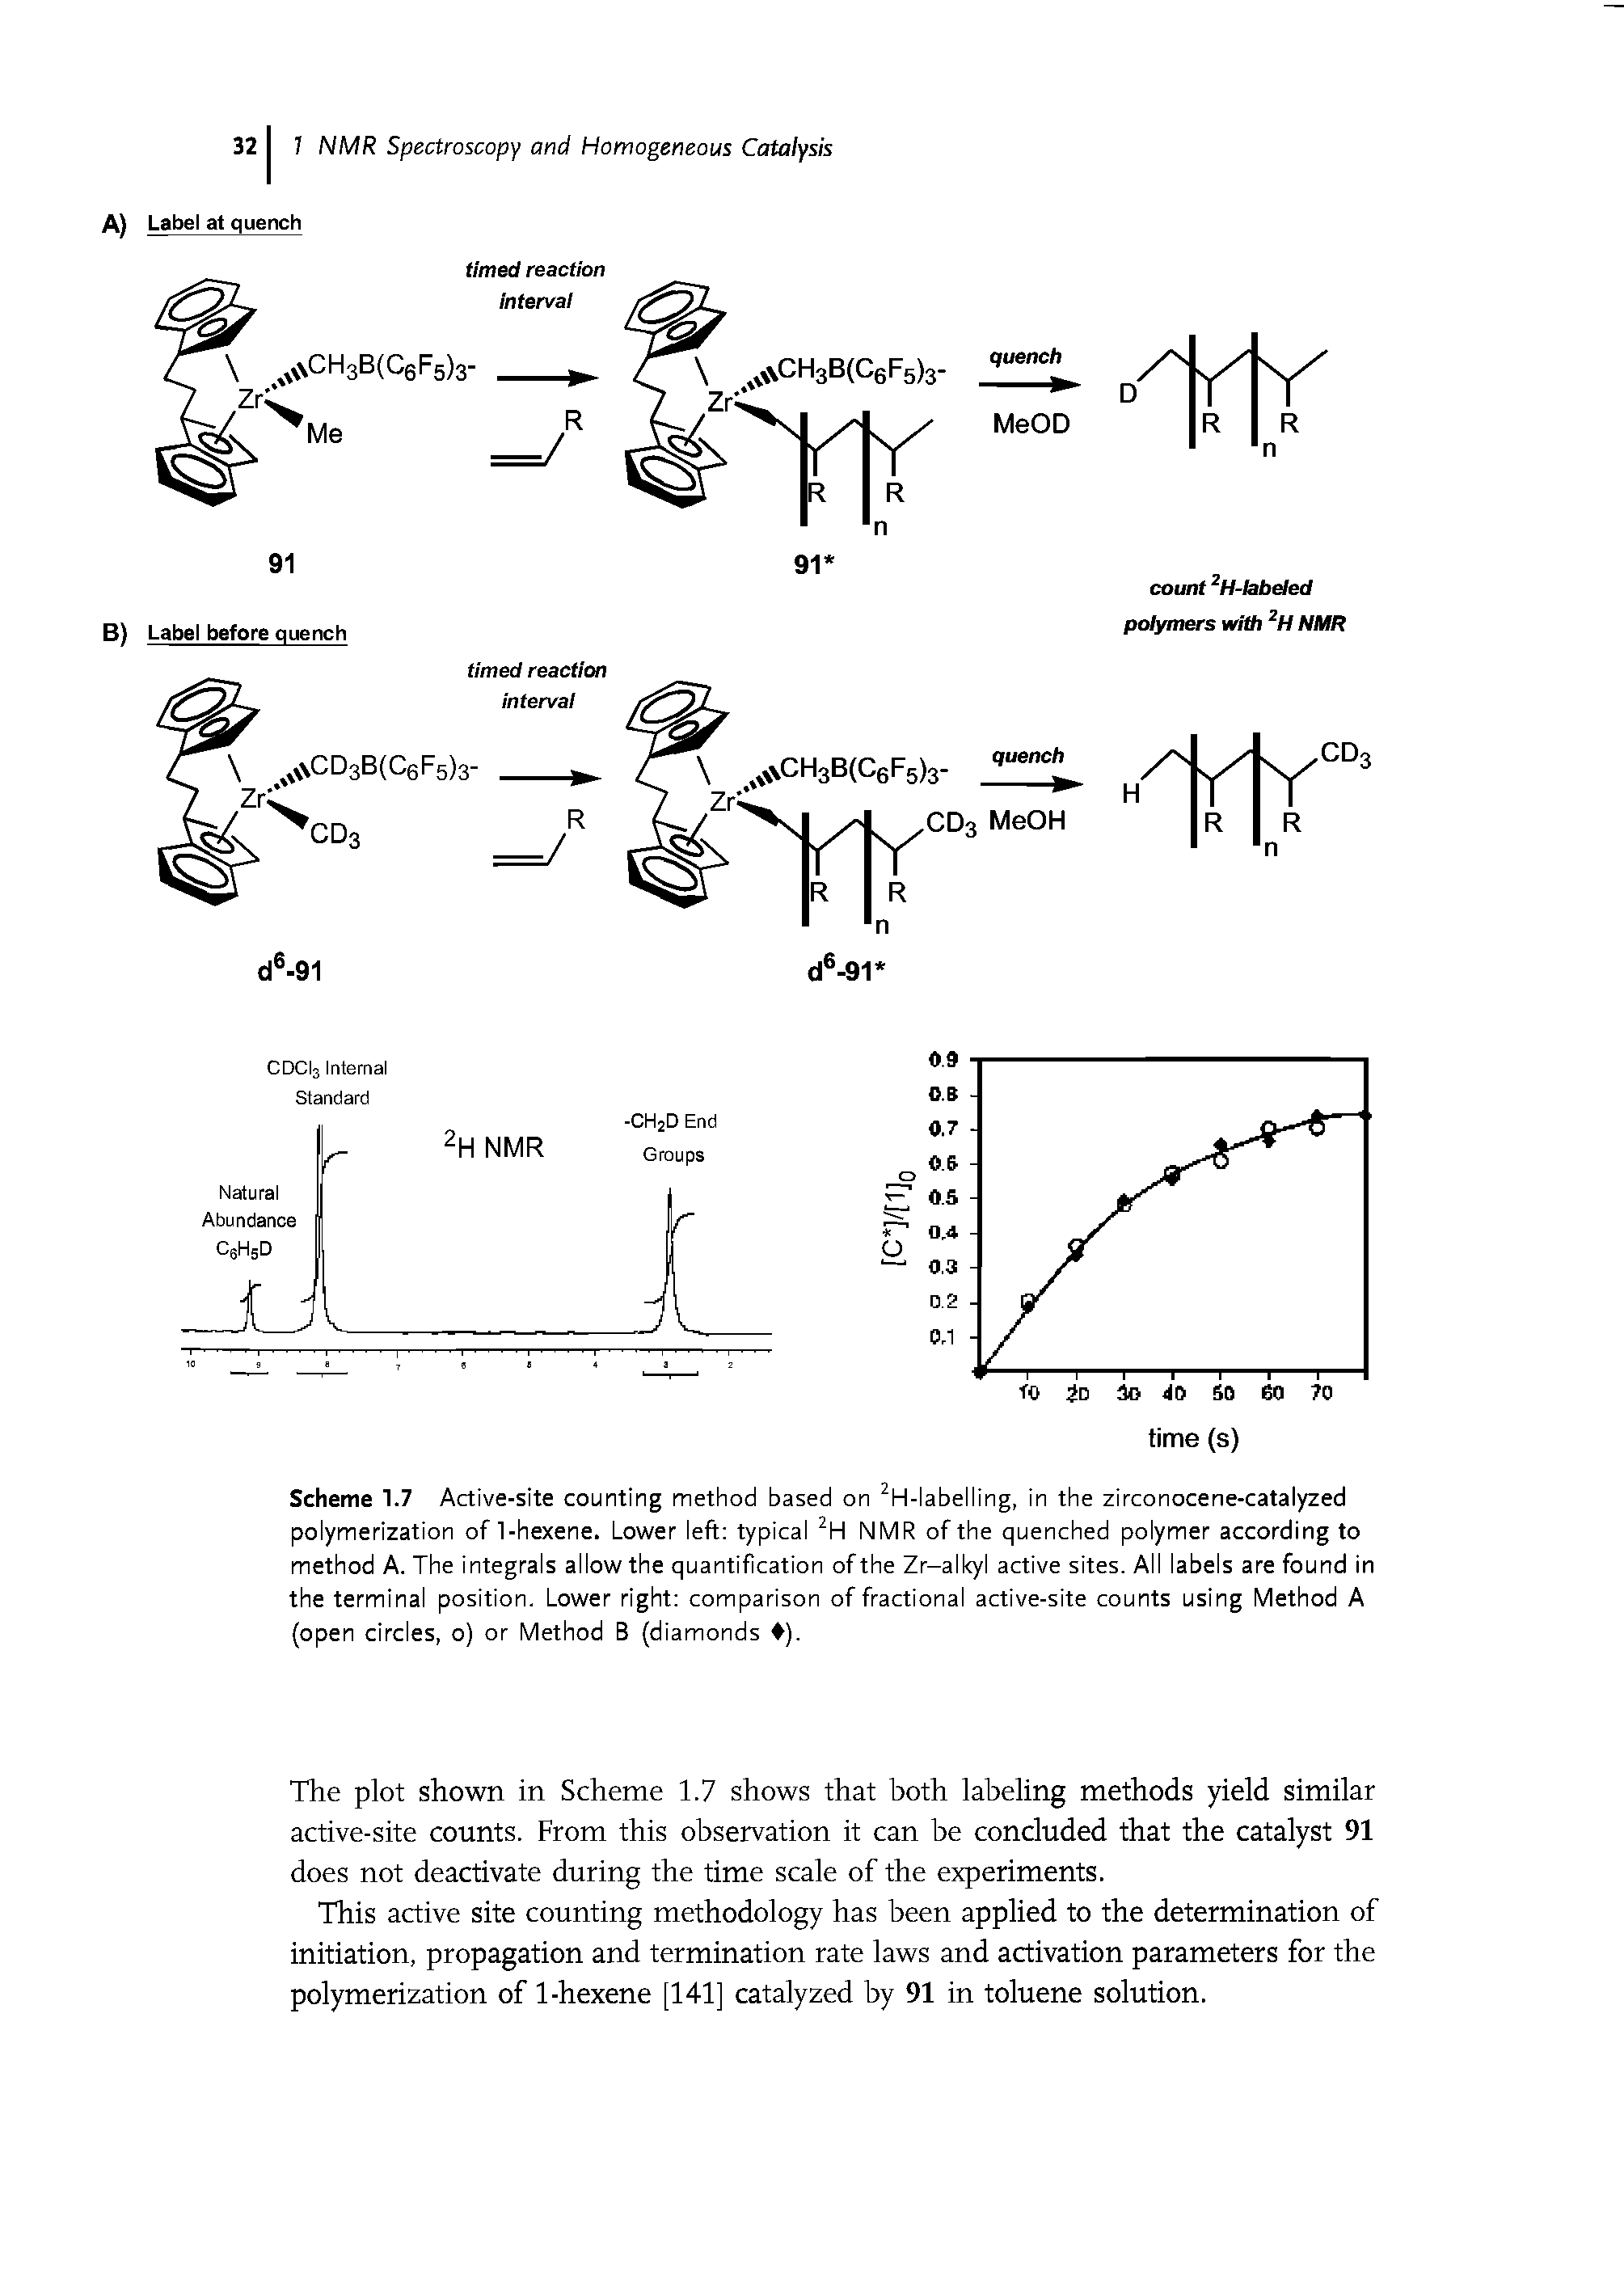 Scheme 1.7 Active-site counting method based on H-labelling, in the zirconocene-catalyzed polymerization of 1-hexene. Lower left typical NMR of the quenched polymer according to method A. The integrals allow the quantification of the Zr-alkyl active sites. All labels are found in the terminal position. Lower right comparison of fractional active-site counts using Method A (open circles, o) or Method B (diamonds ).